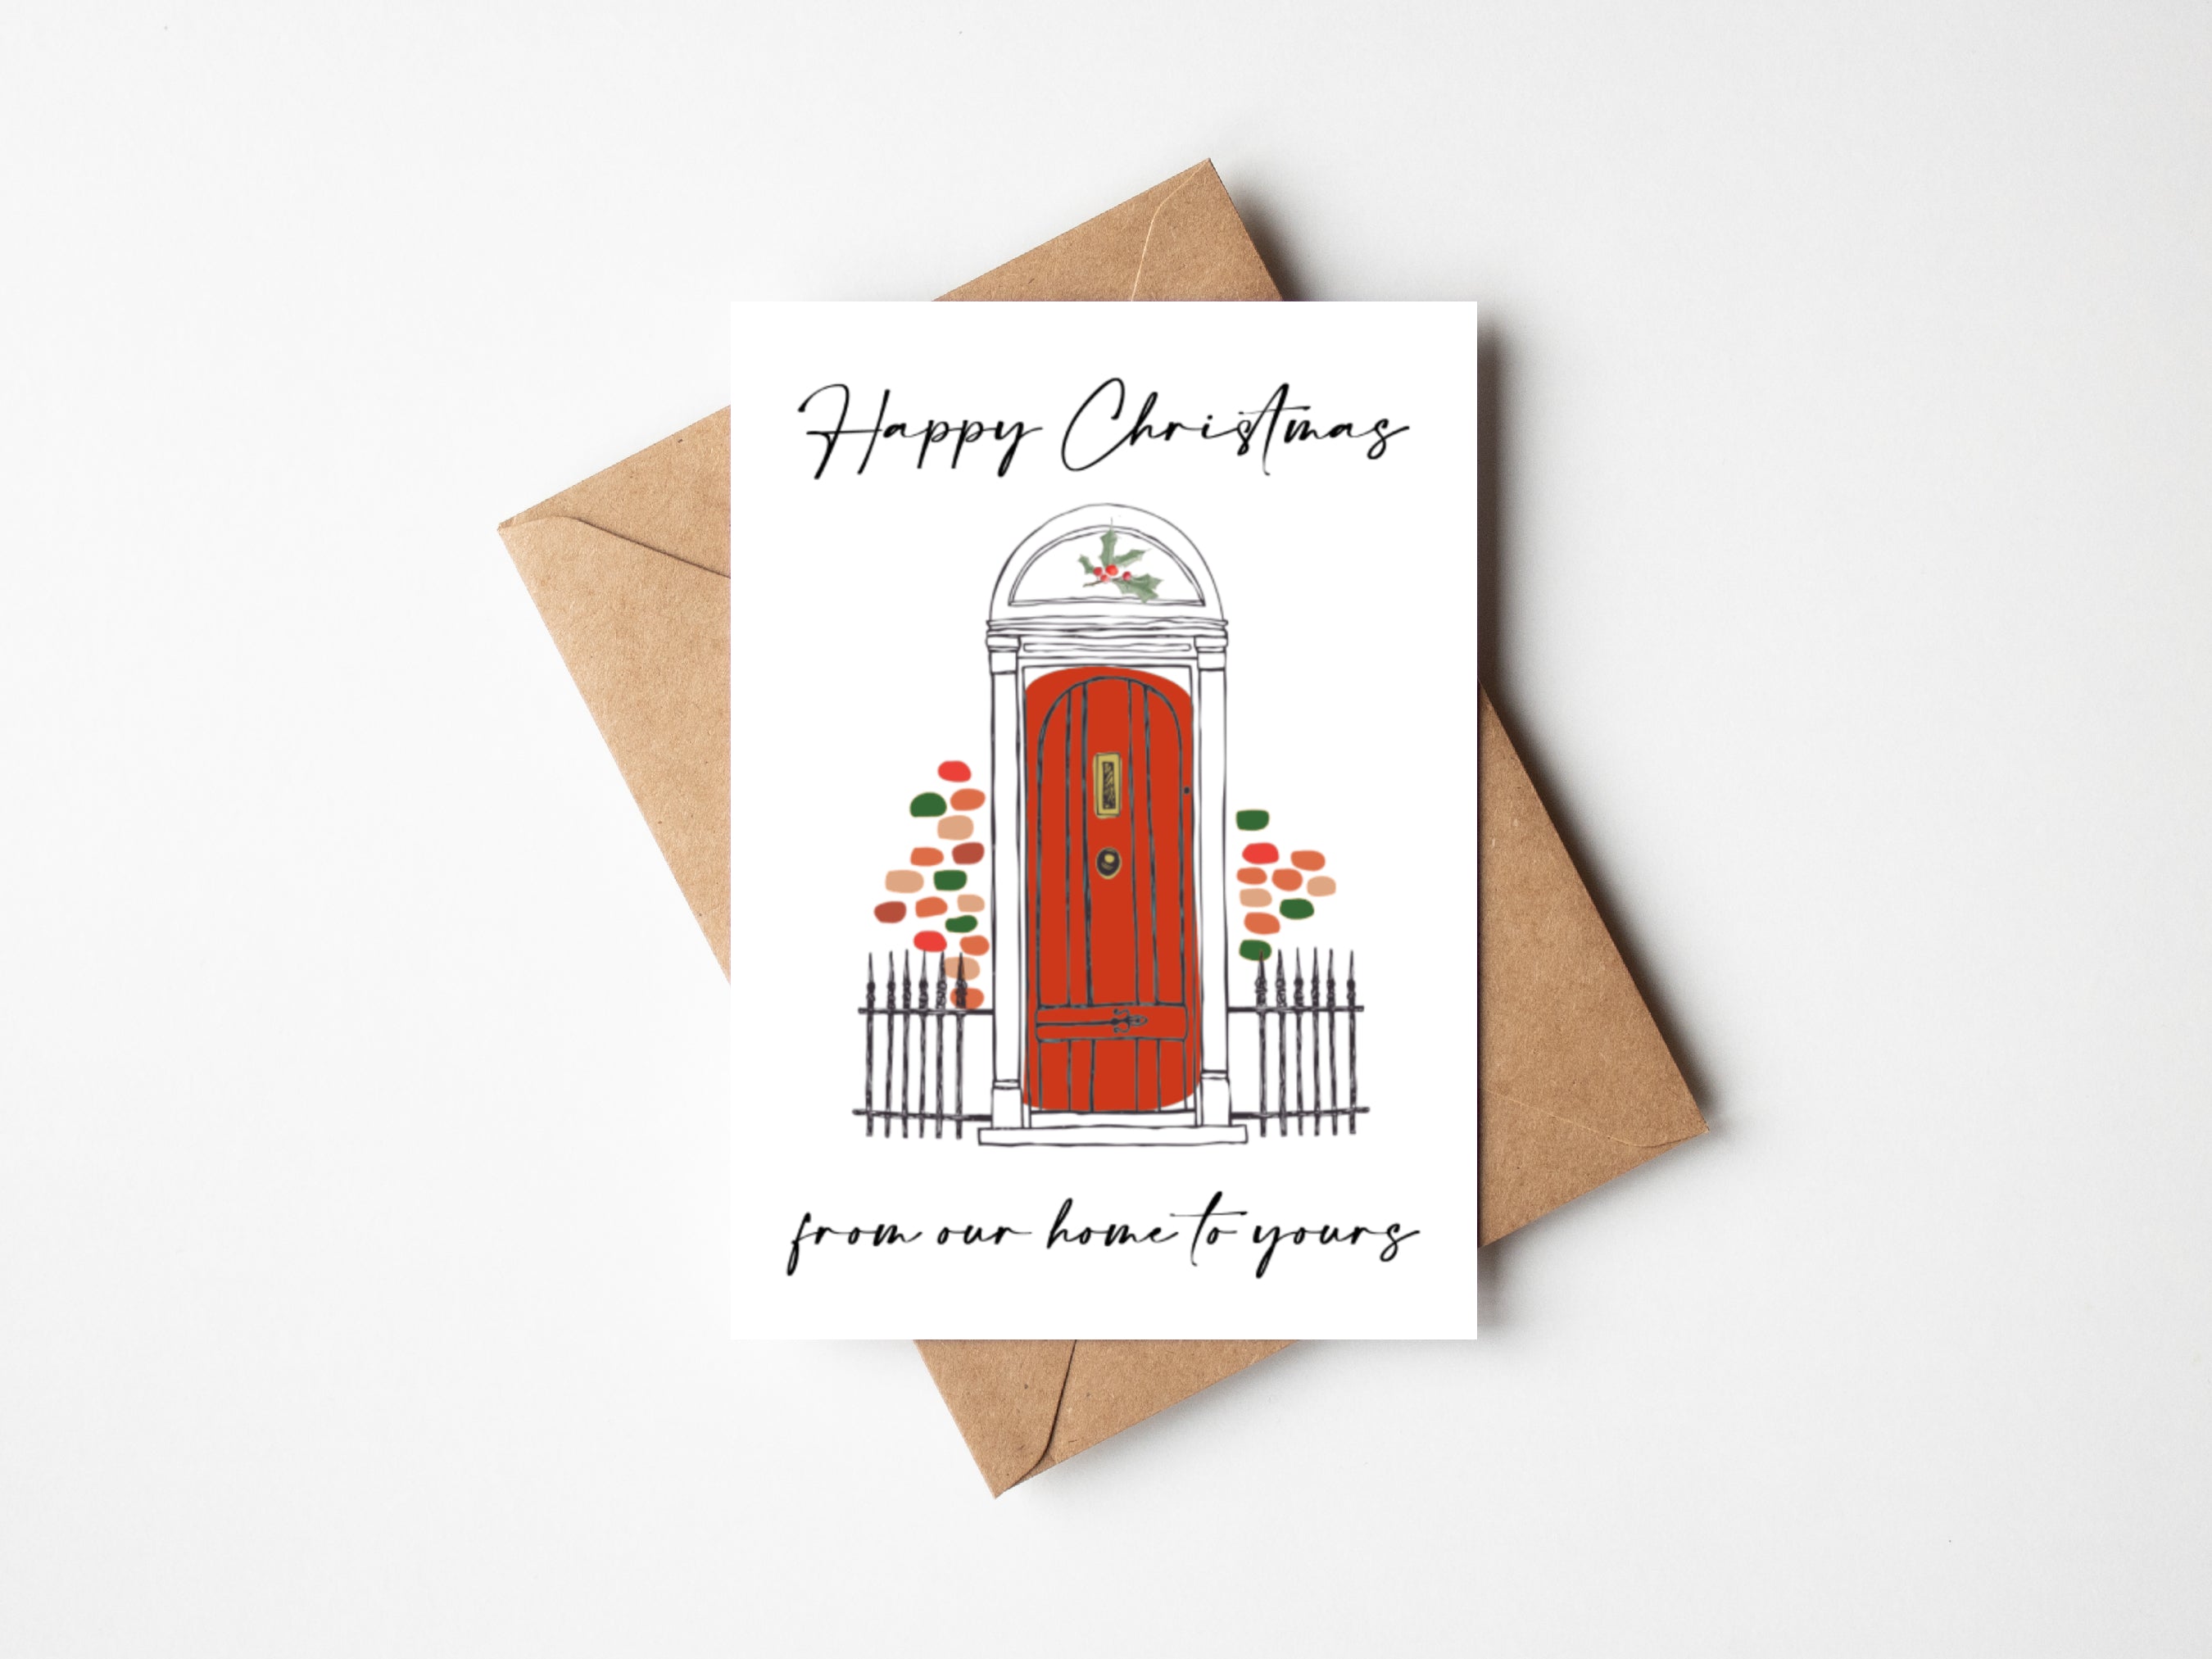 happy christmas from our home to yours card featuring red edwardian door with colourful bricks and holly bush sits on top of brown kraft envelope